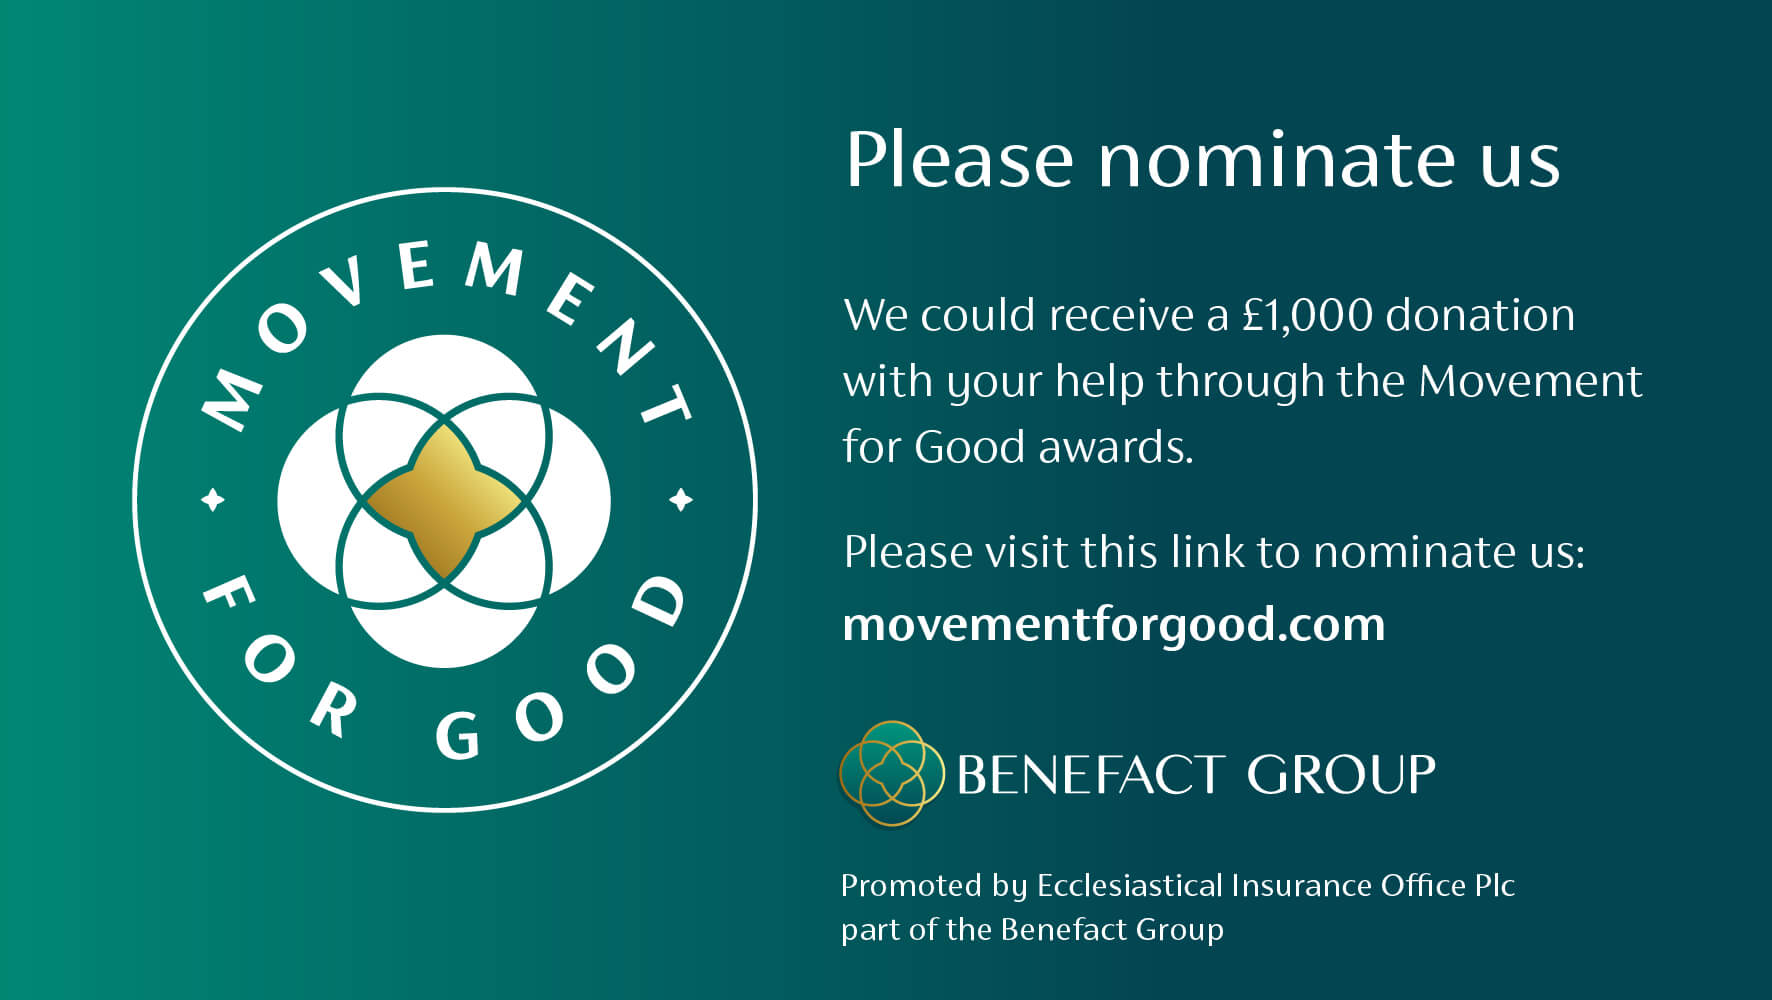 Movement for Good Awards: Nominate Contact to win £1,000